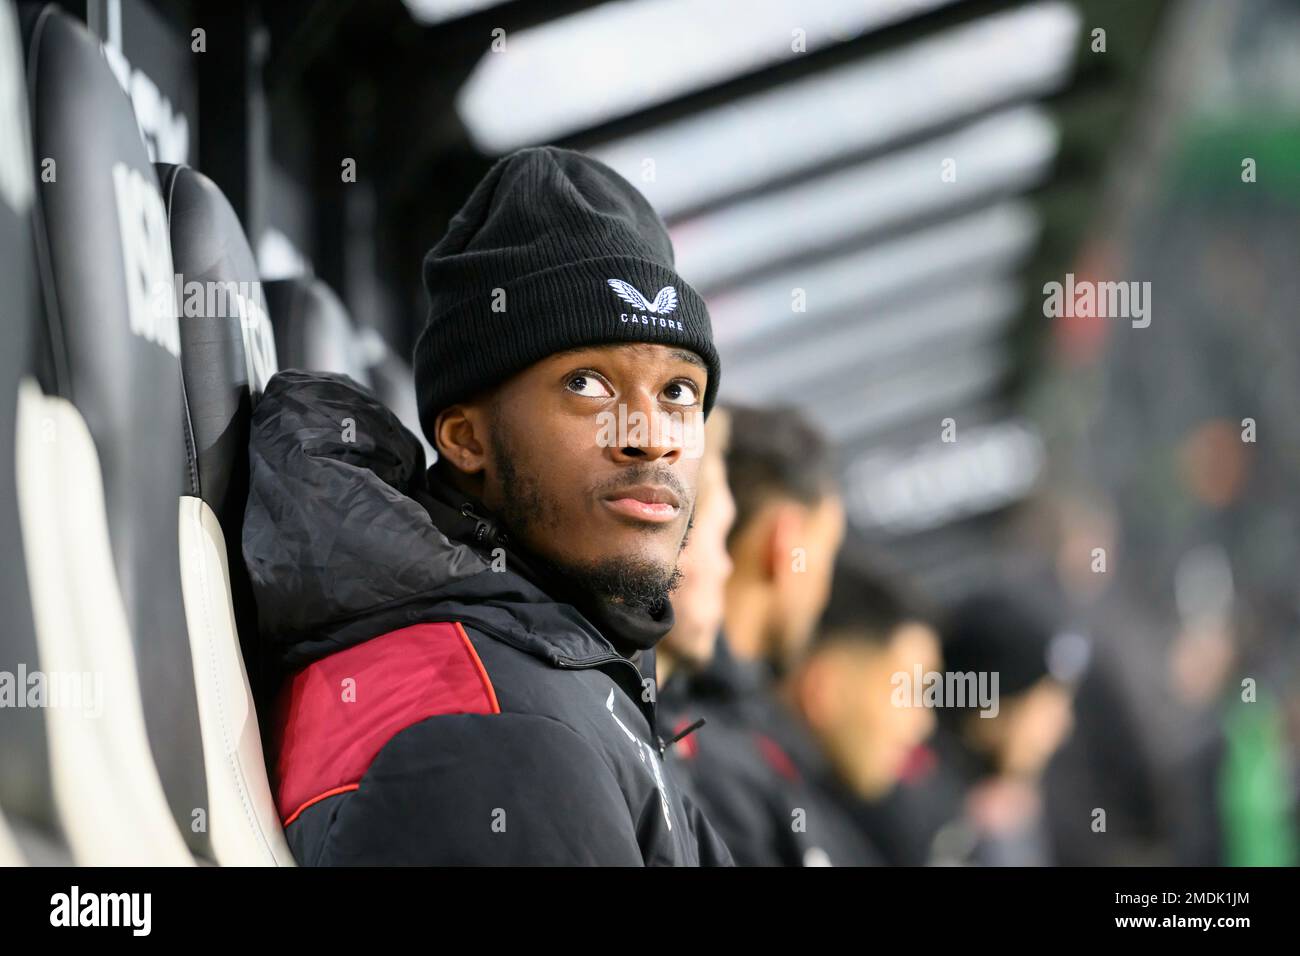 Callum HUDSON-ODOI (LEV) on the bench with muetze Soccer 1st Bundesliga, 16th matchday, Borussia Monchengladbach (MG) - Bayer 04 Leverkusen (LEV) 2: 3, on January 22nd, 2023 in Borussia Monchengladbach / Germany. #DFL regulations prohibit any use of photographs as image sequences and/or quasi-video # Stock Photo